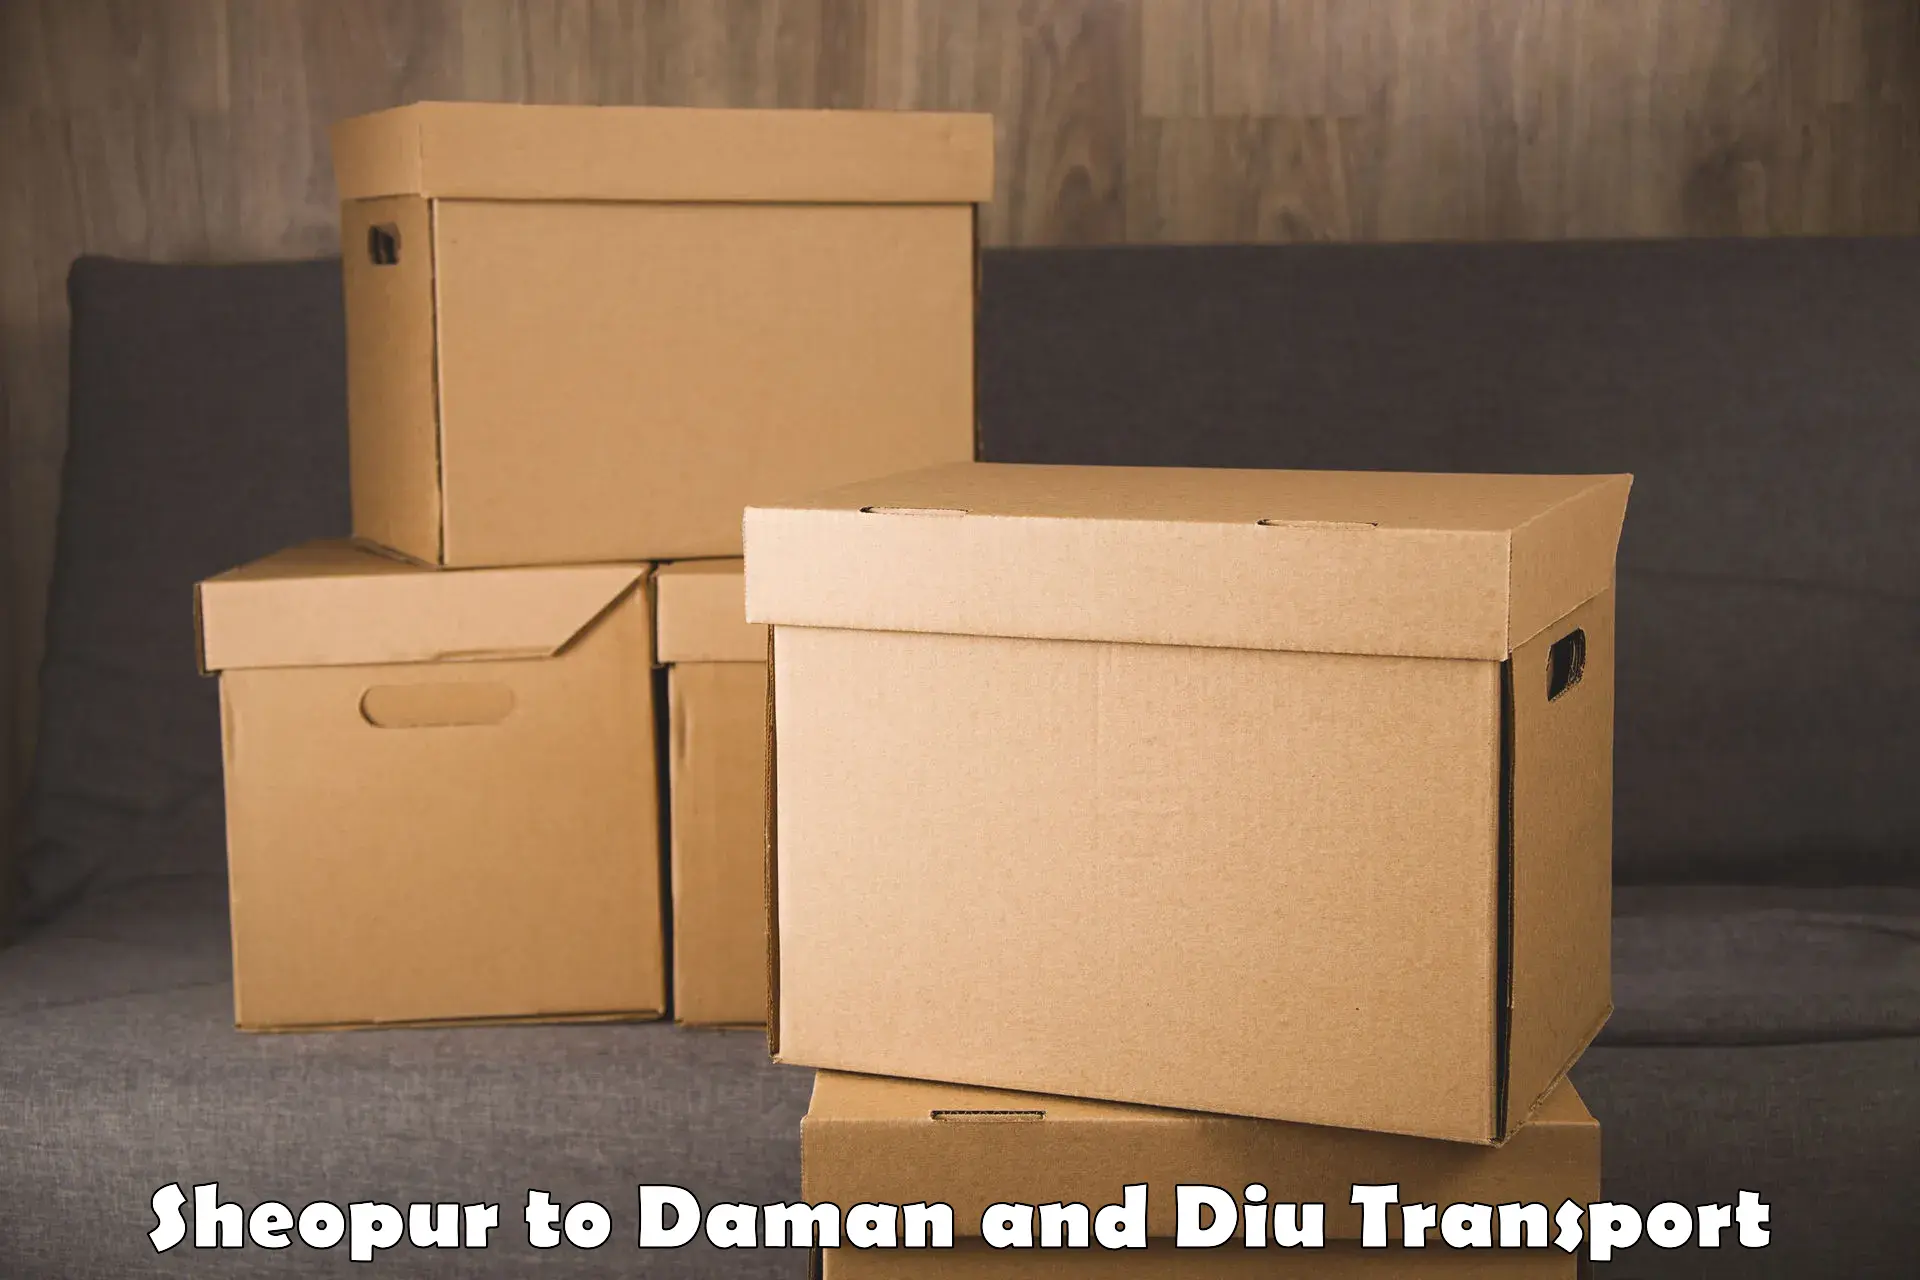 Daily parcel service transport Sheopur to Daman and Diu